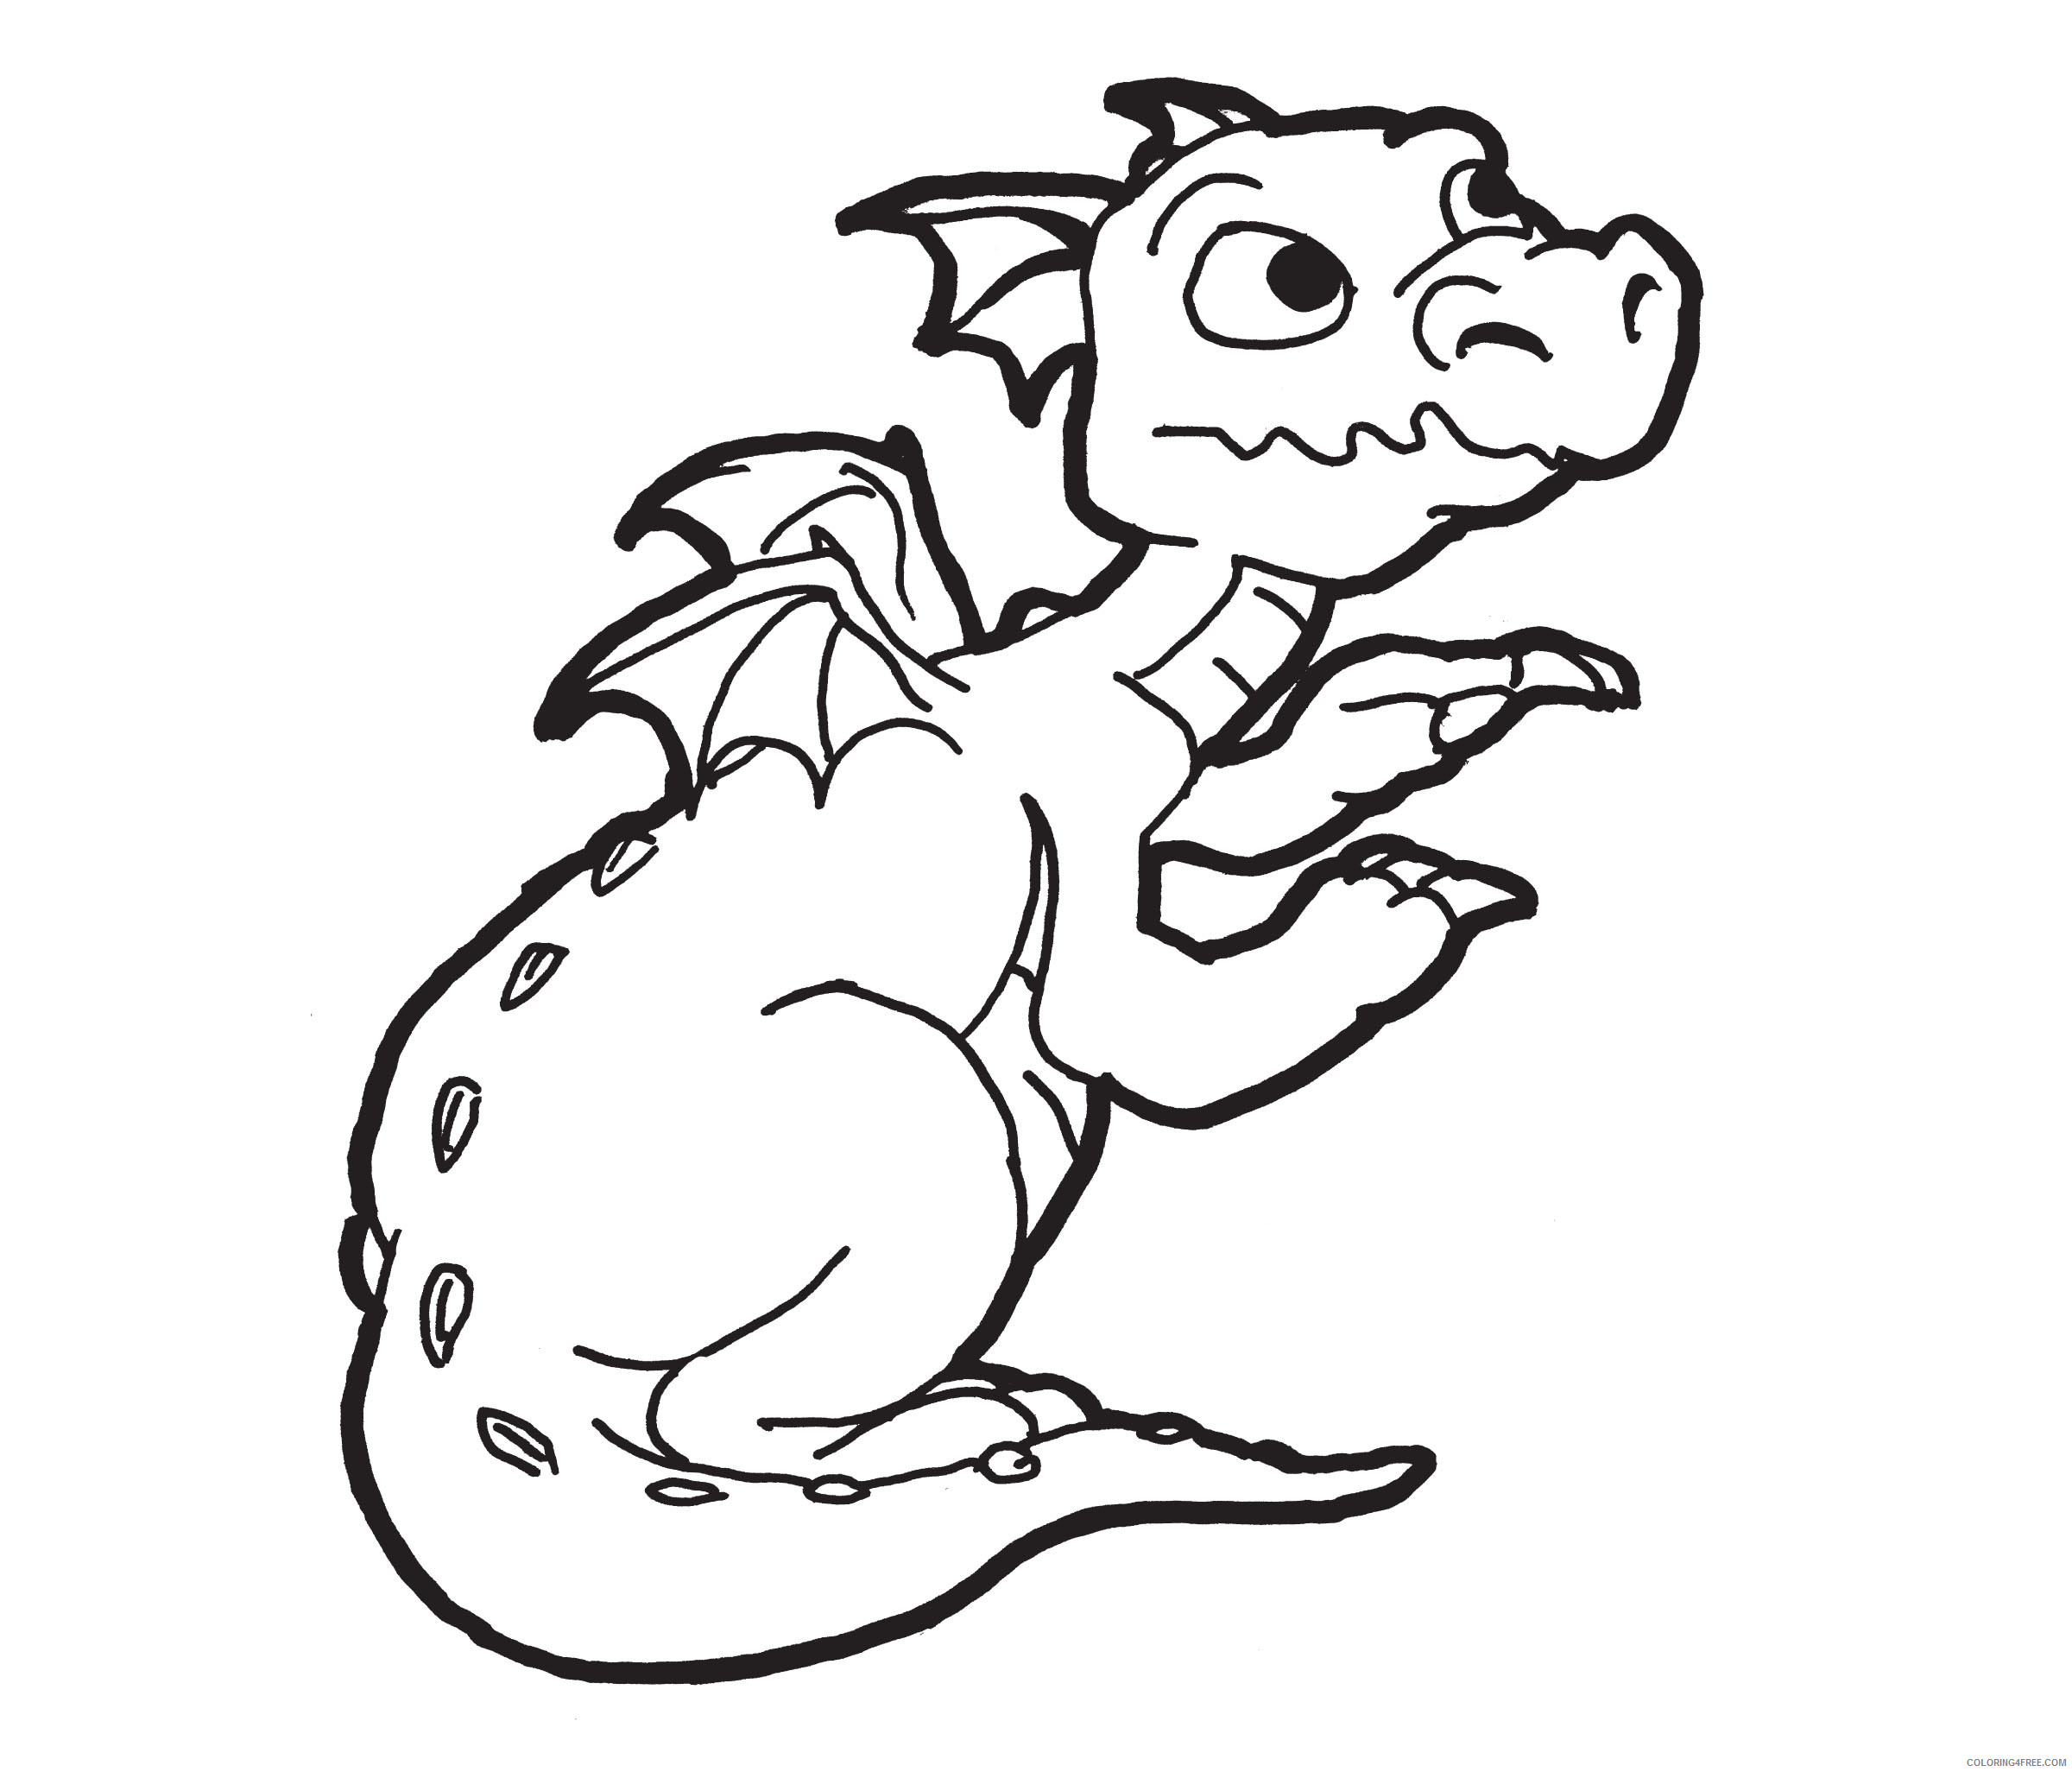 Black and White Dragon Coloring Pages dragons WzQEwY clipart Printable Coloring4free